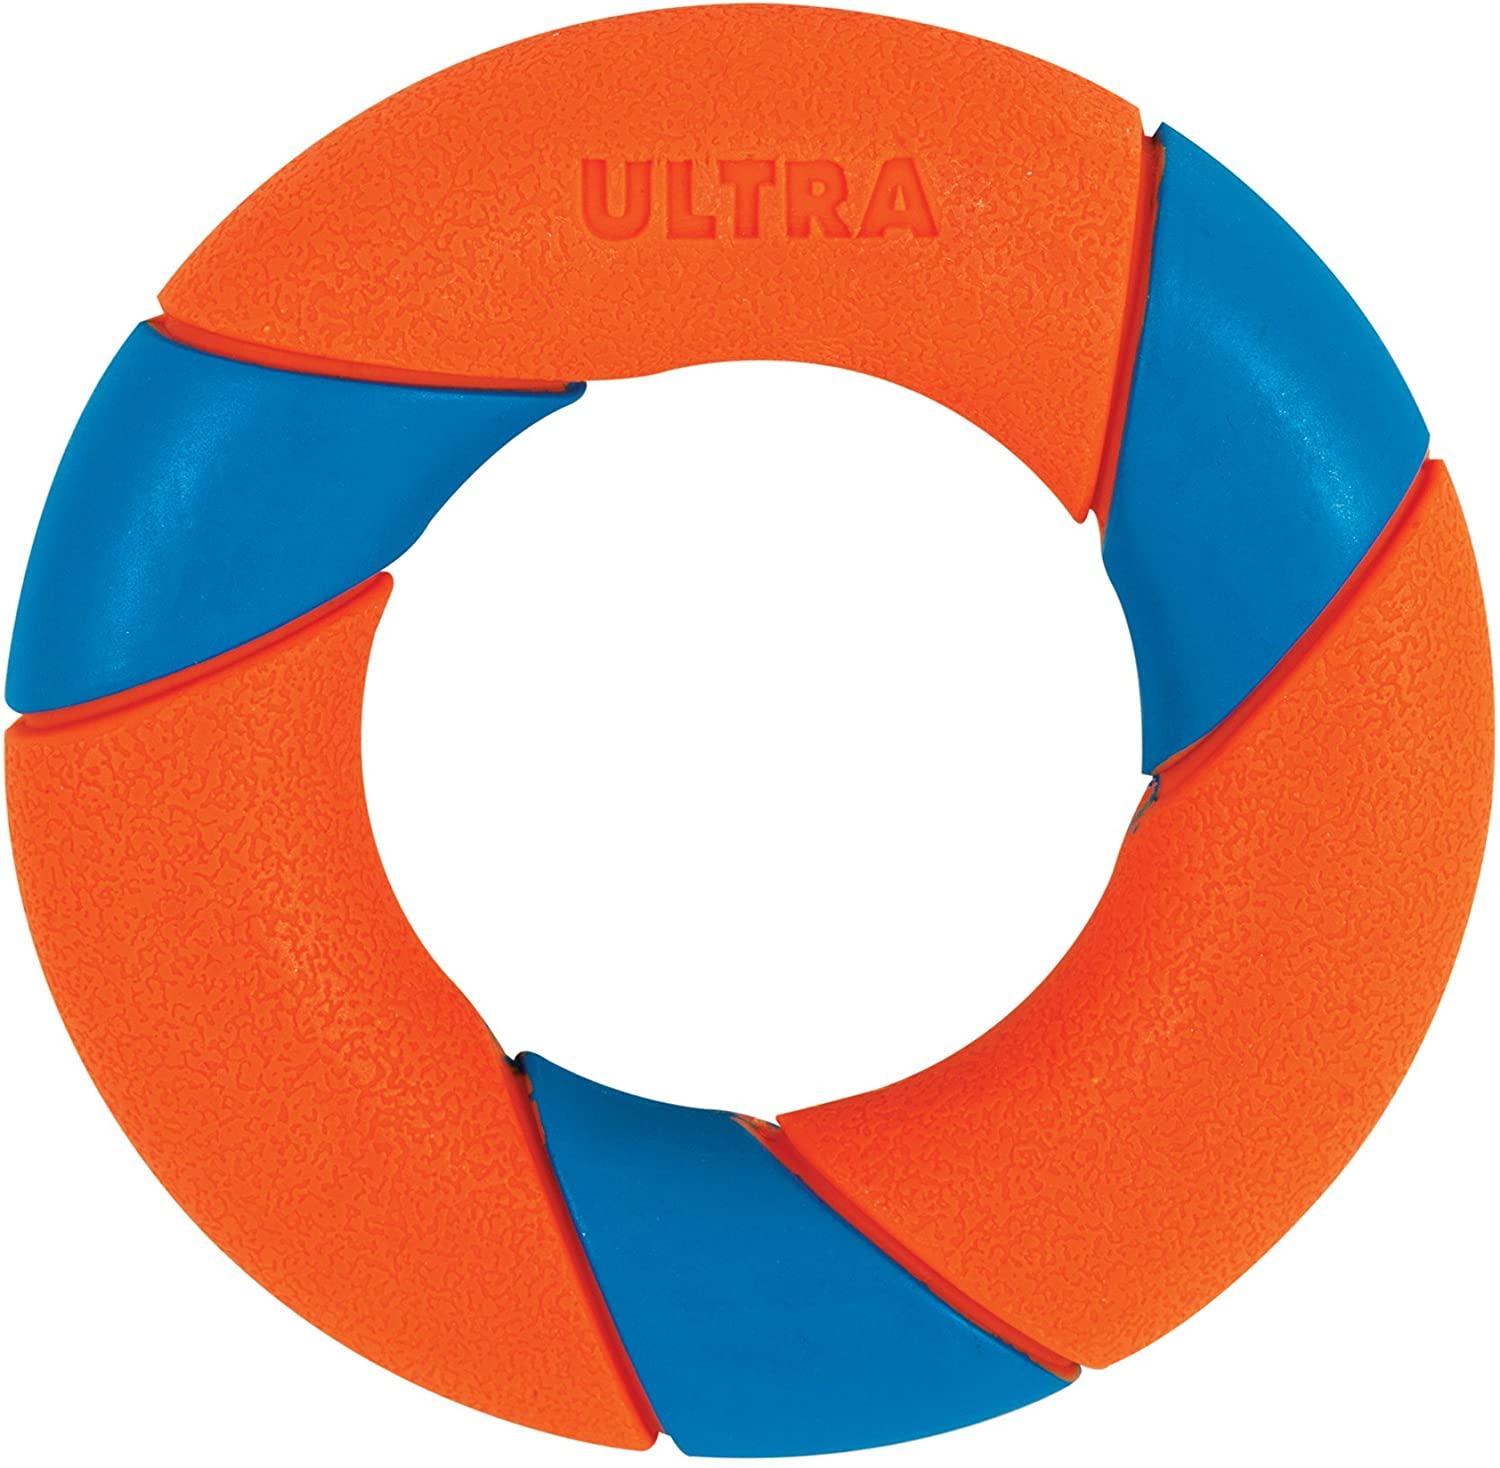 Chuckit! Ultra Ring - Pet's Play Toy Store